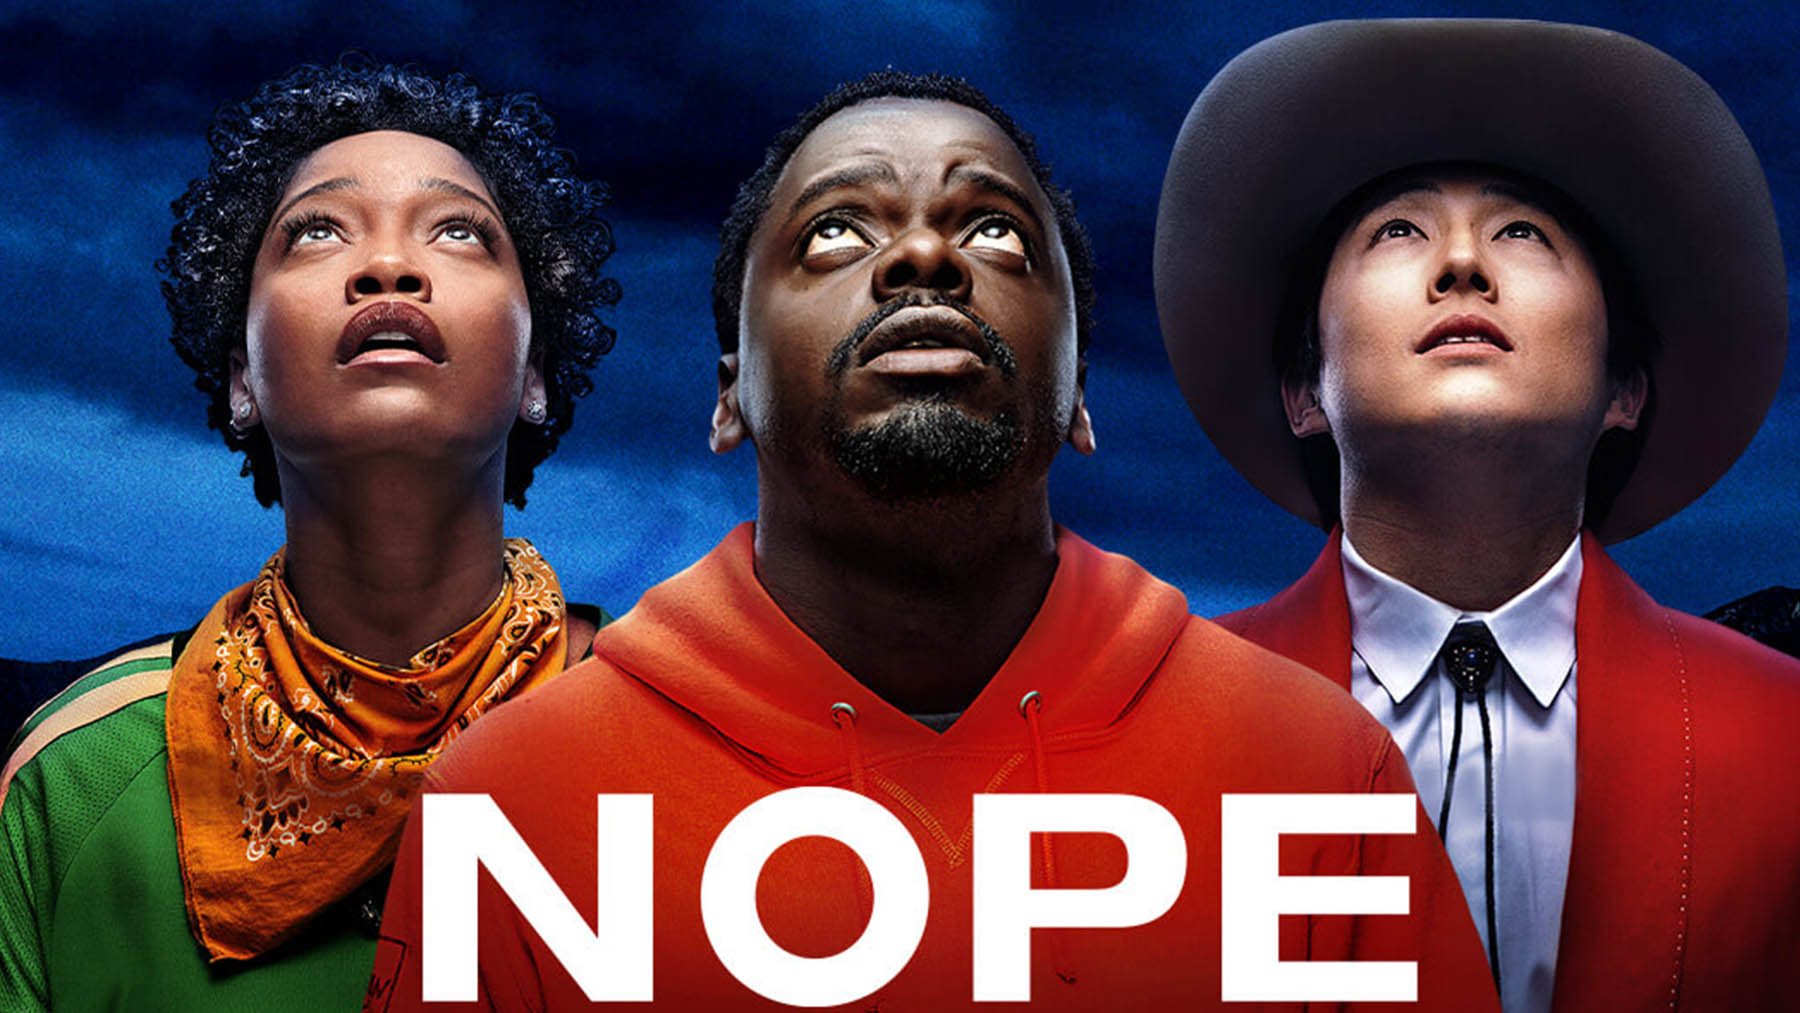 ‘Nope’ (Universal Pictures)